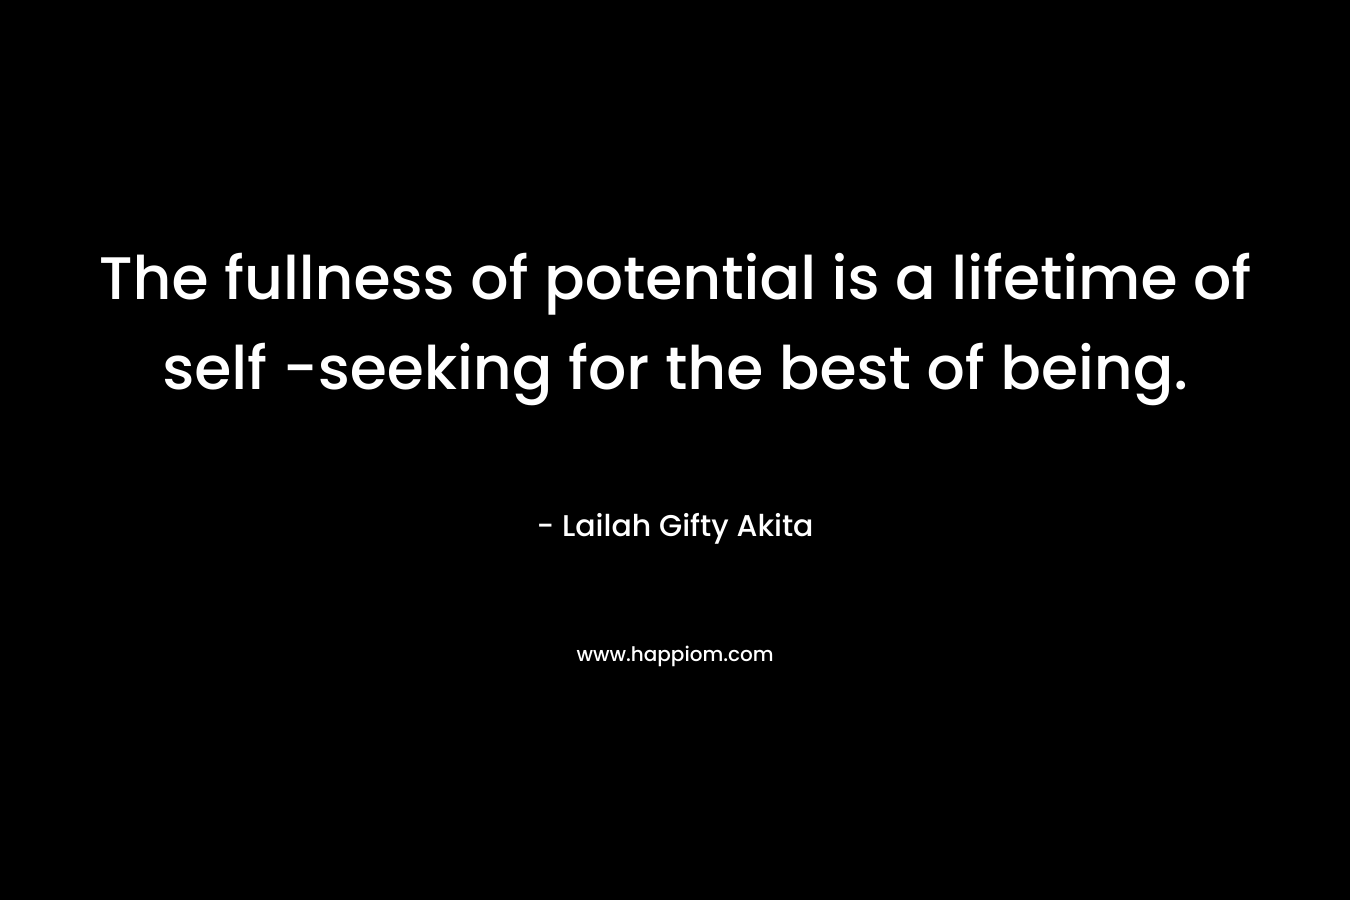 The fullness of potential is a lifetime of self -seeking for the best of being.